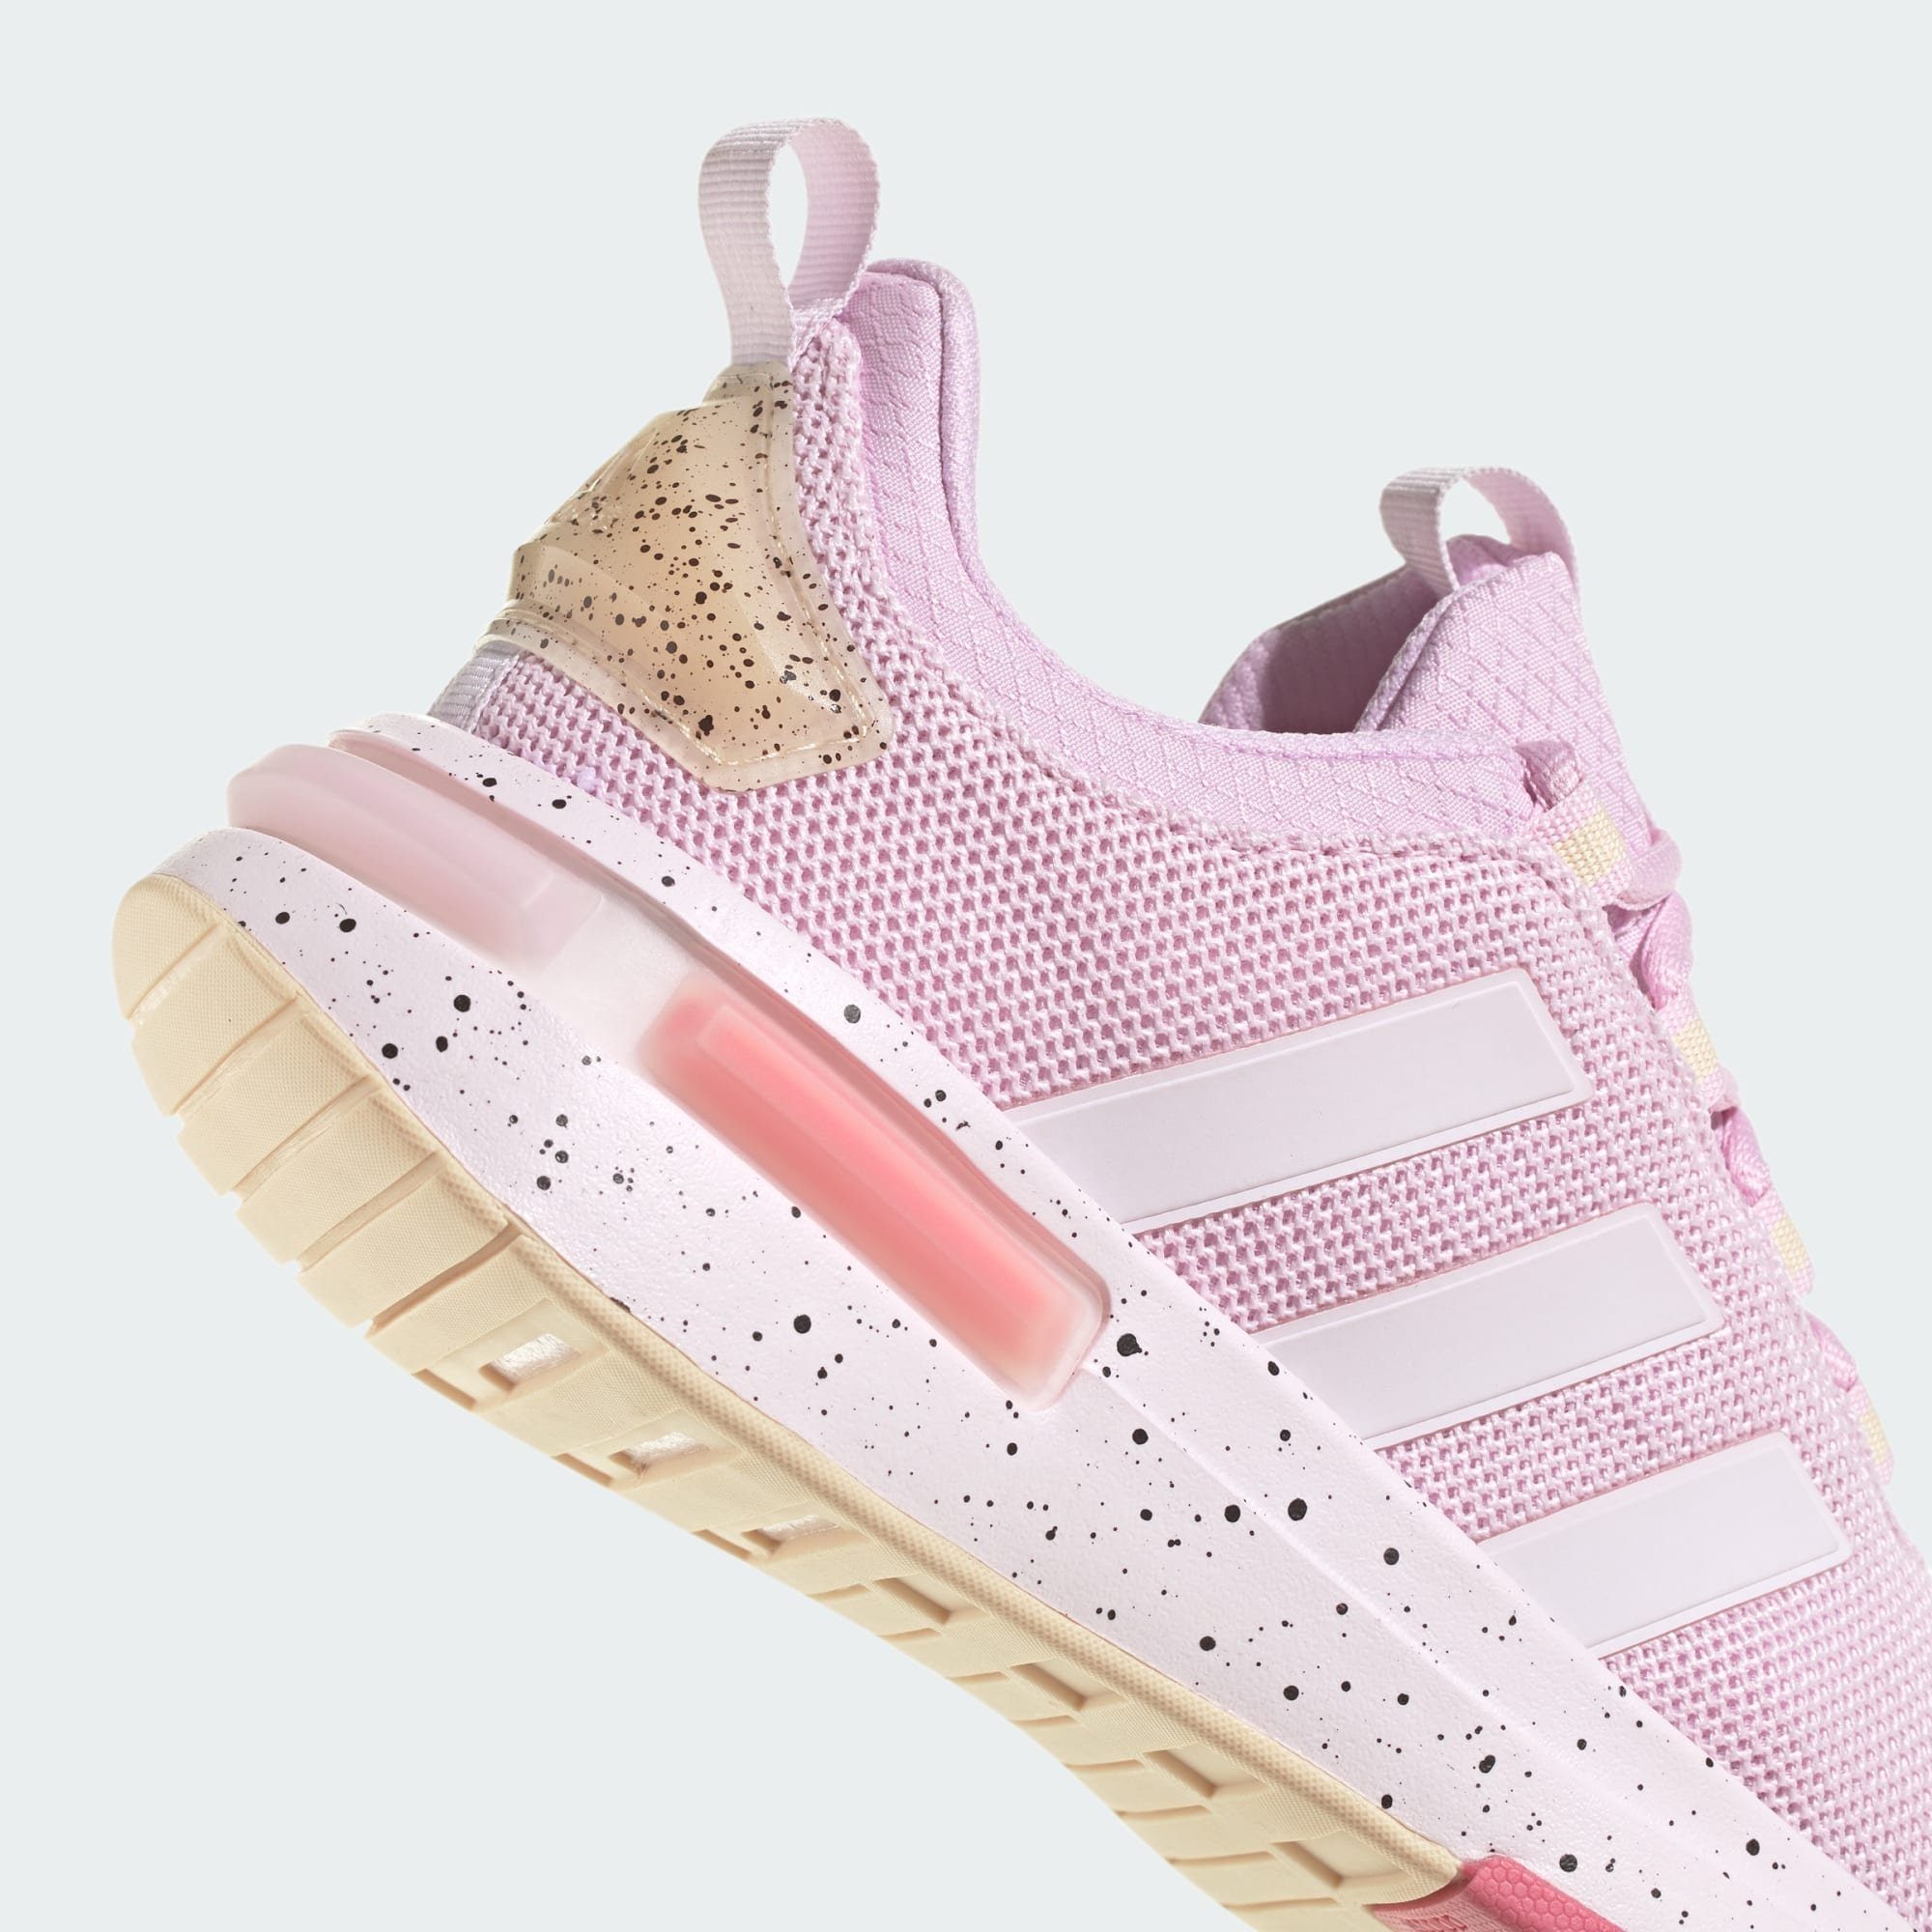 Fusion RACER TR23 Sneaker Fusion SCHUH Pink / Orchid Almost Pink adidas Sportswear /